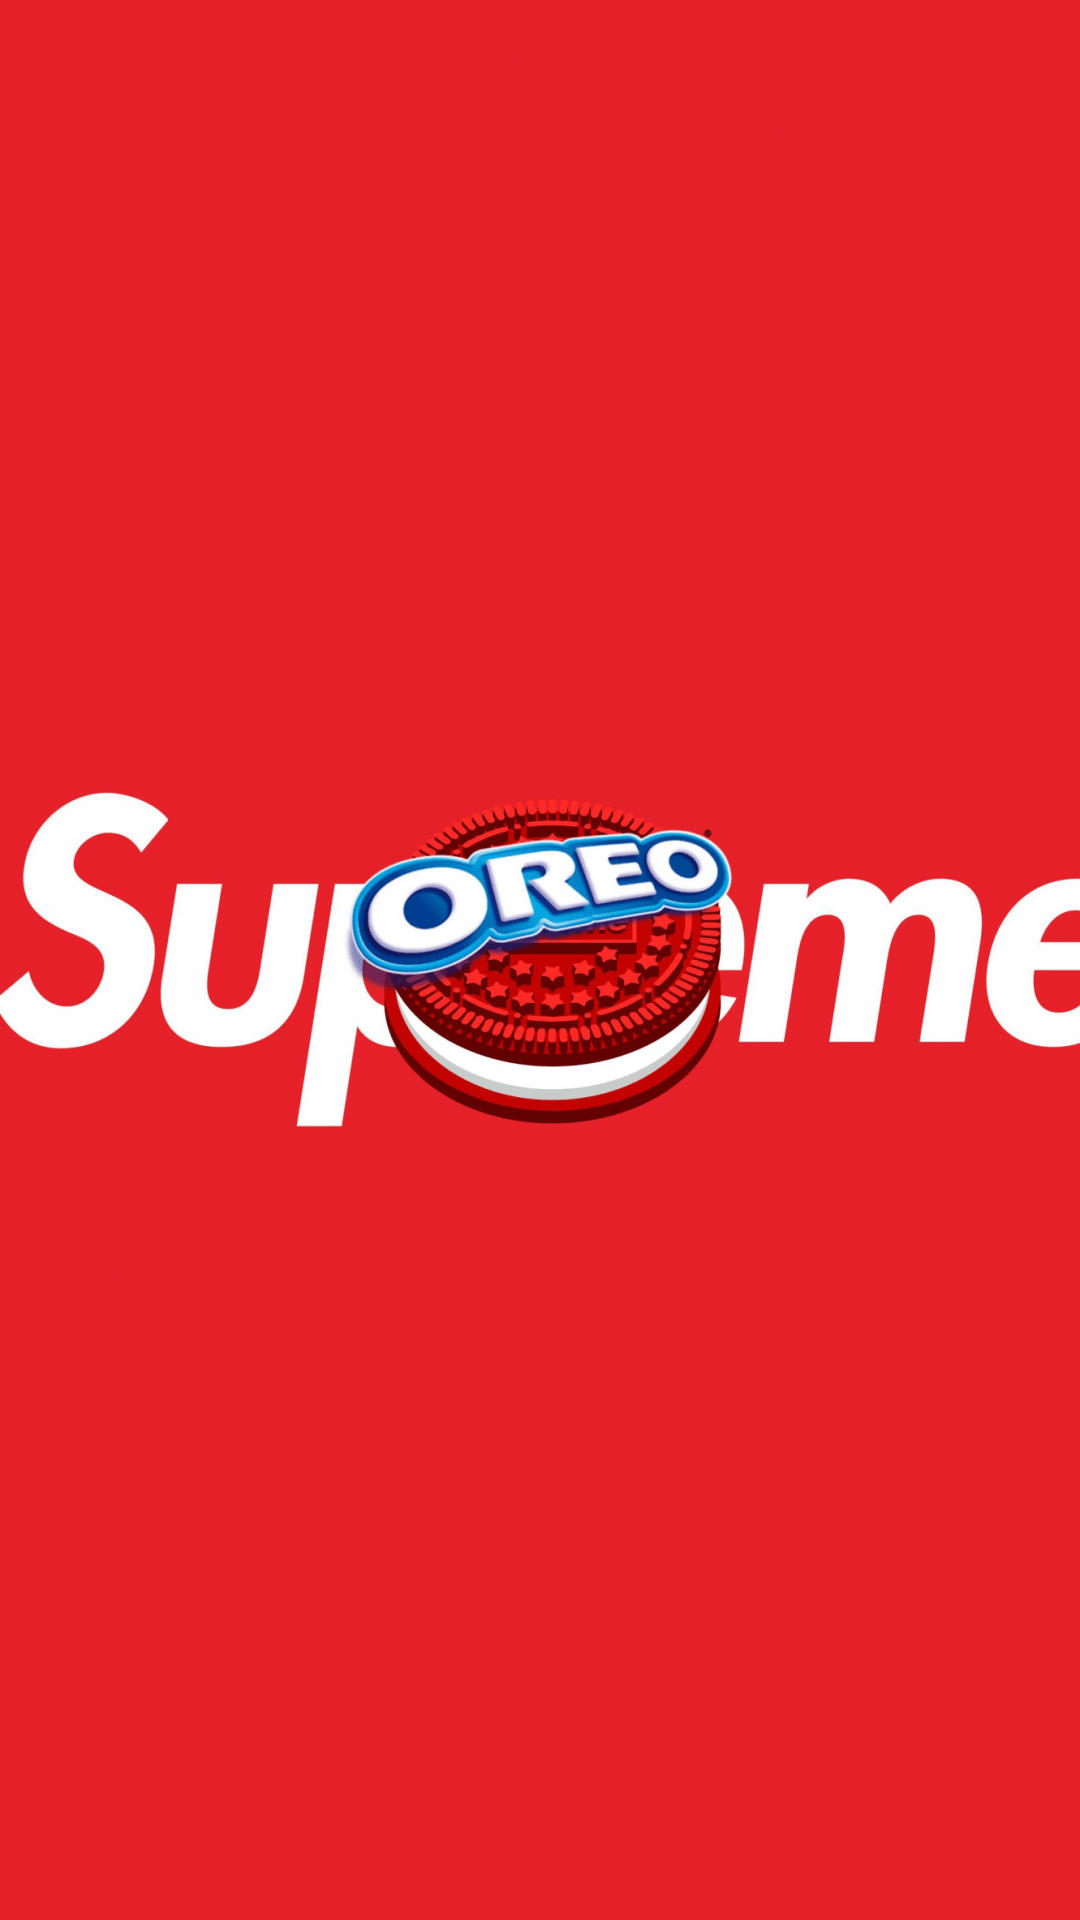 Oreo Supreme wallpaper for iPhone and Android - Supreme, Oreo